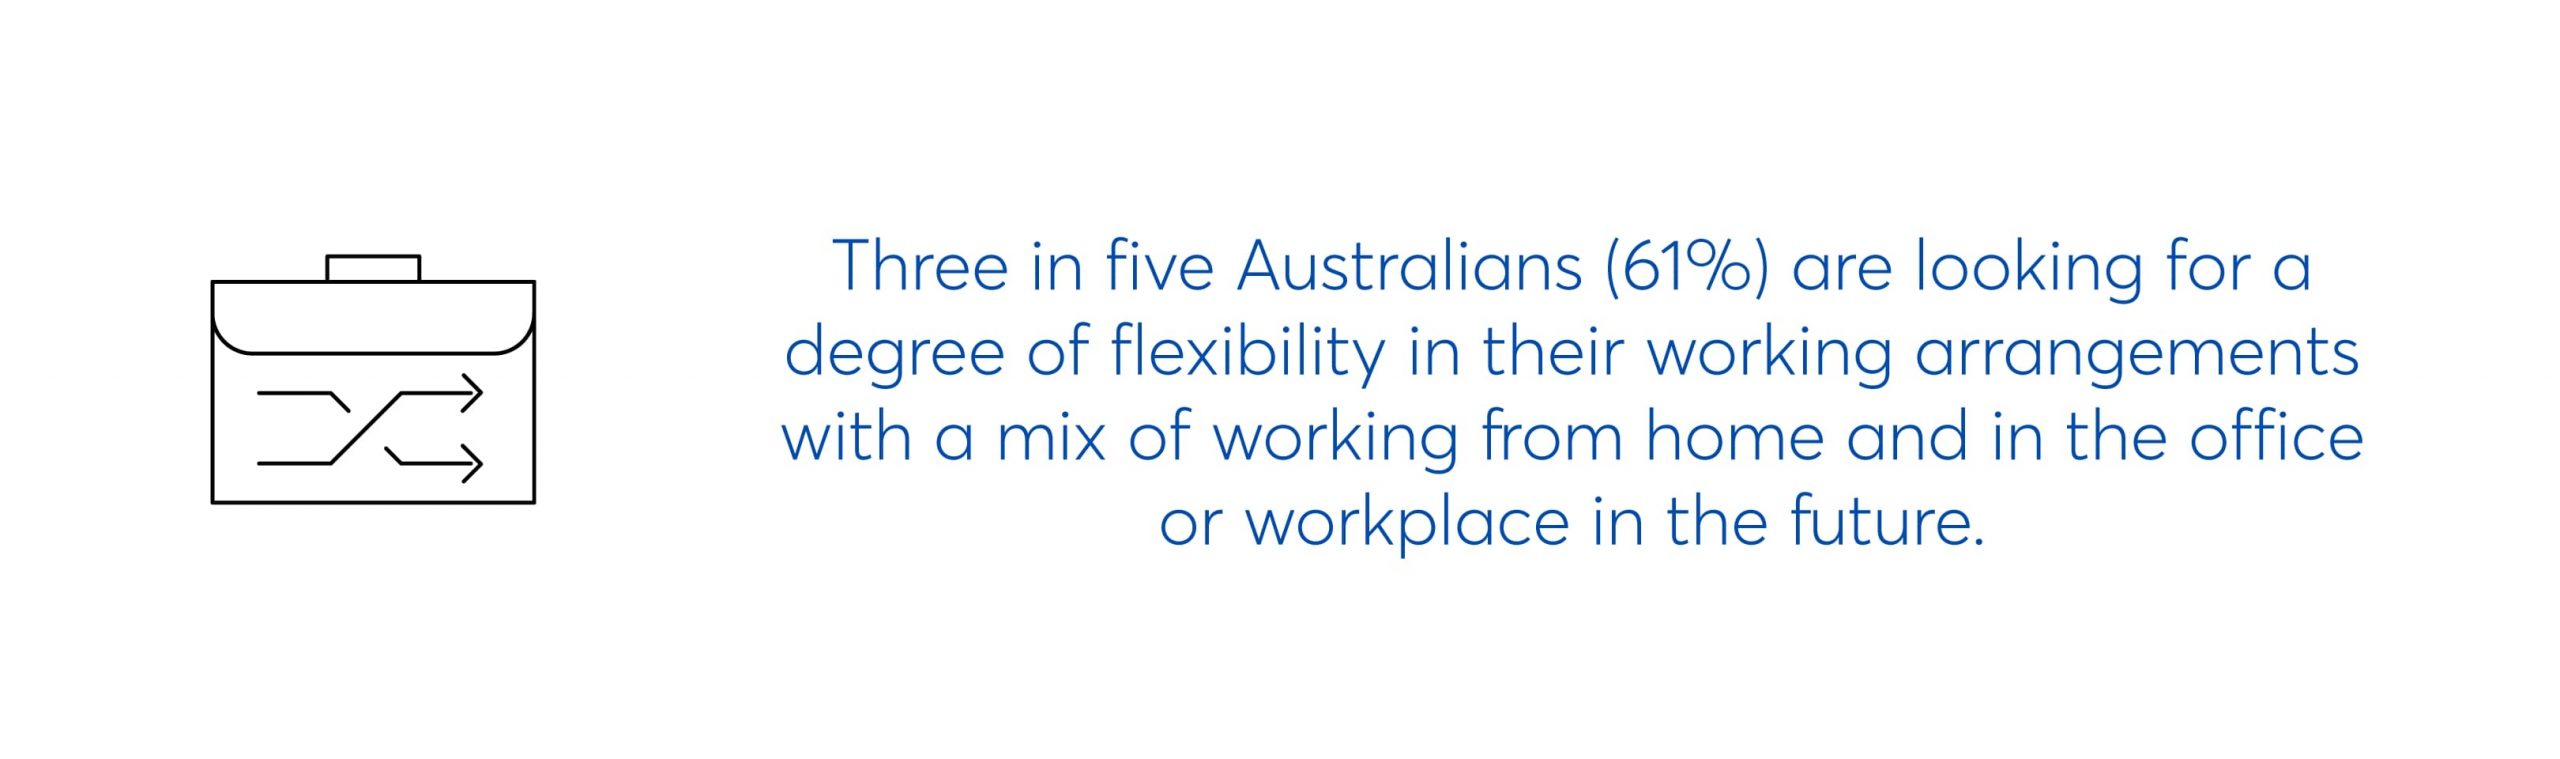 three in five australians are looking for a degree of flexibility in their working arrangements with a mix of working from home and in the office or workplace in the future